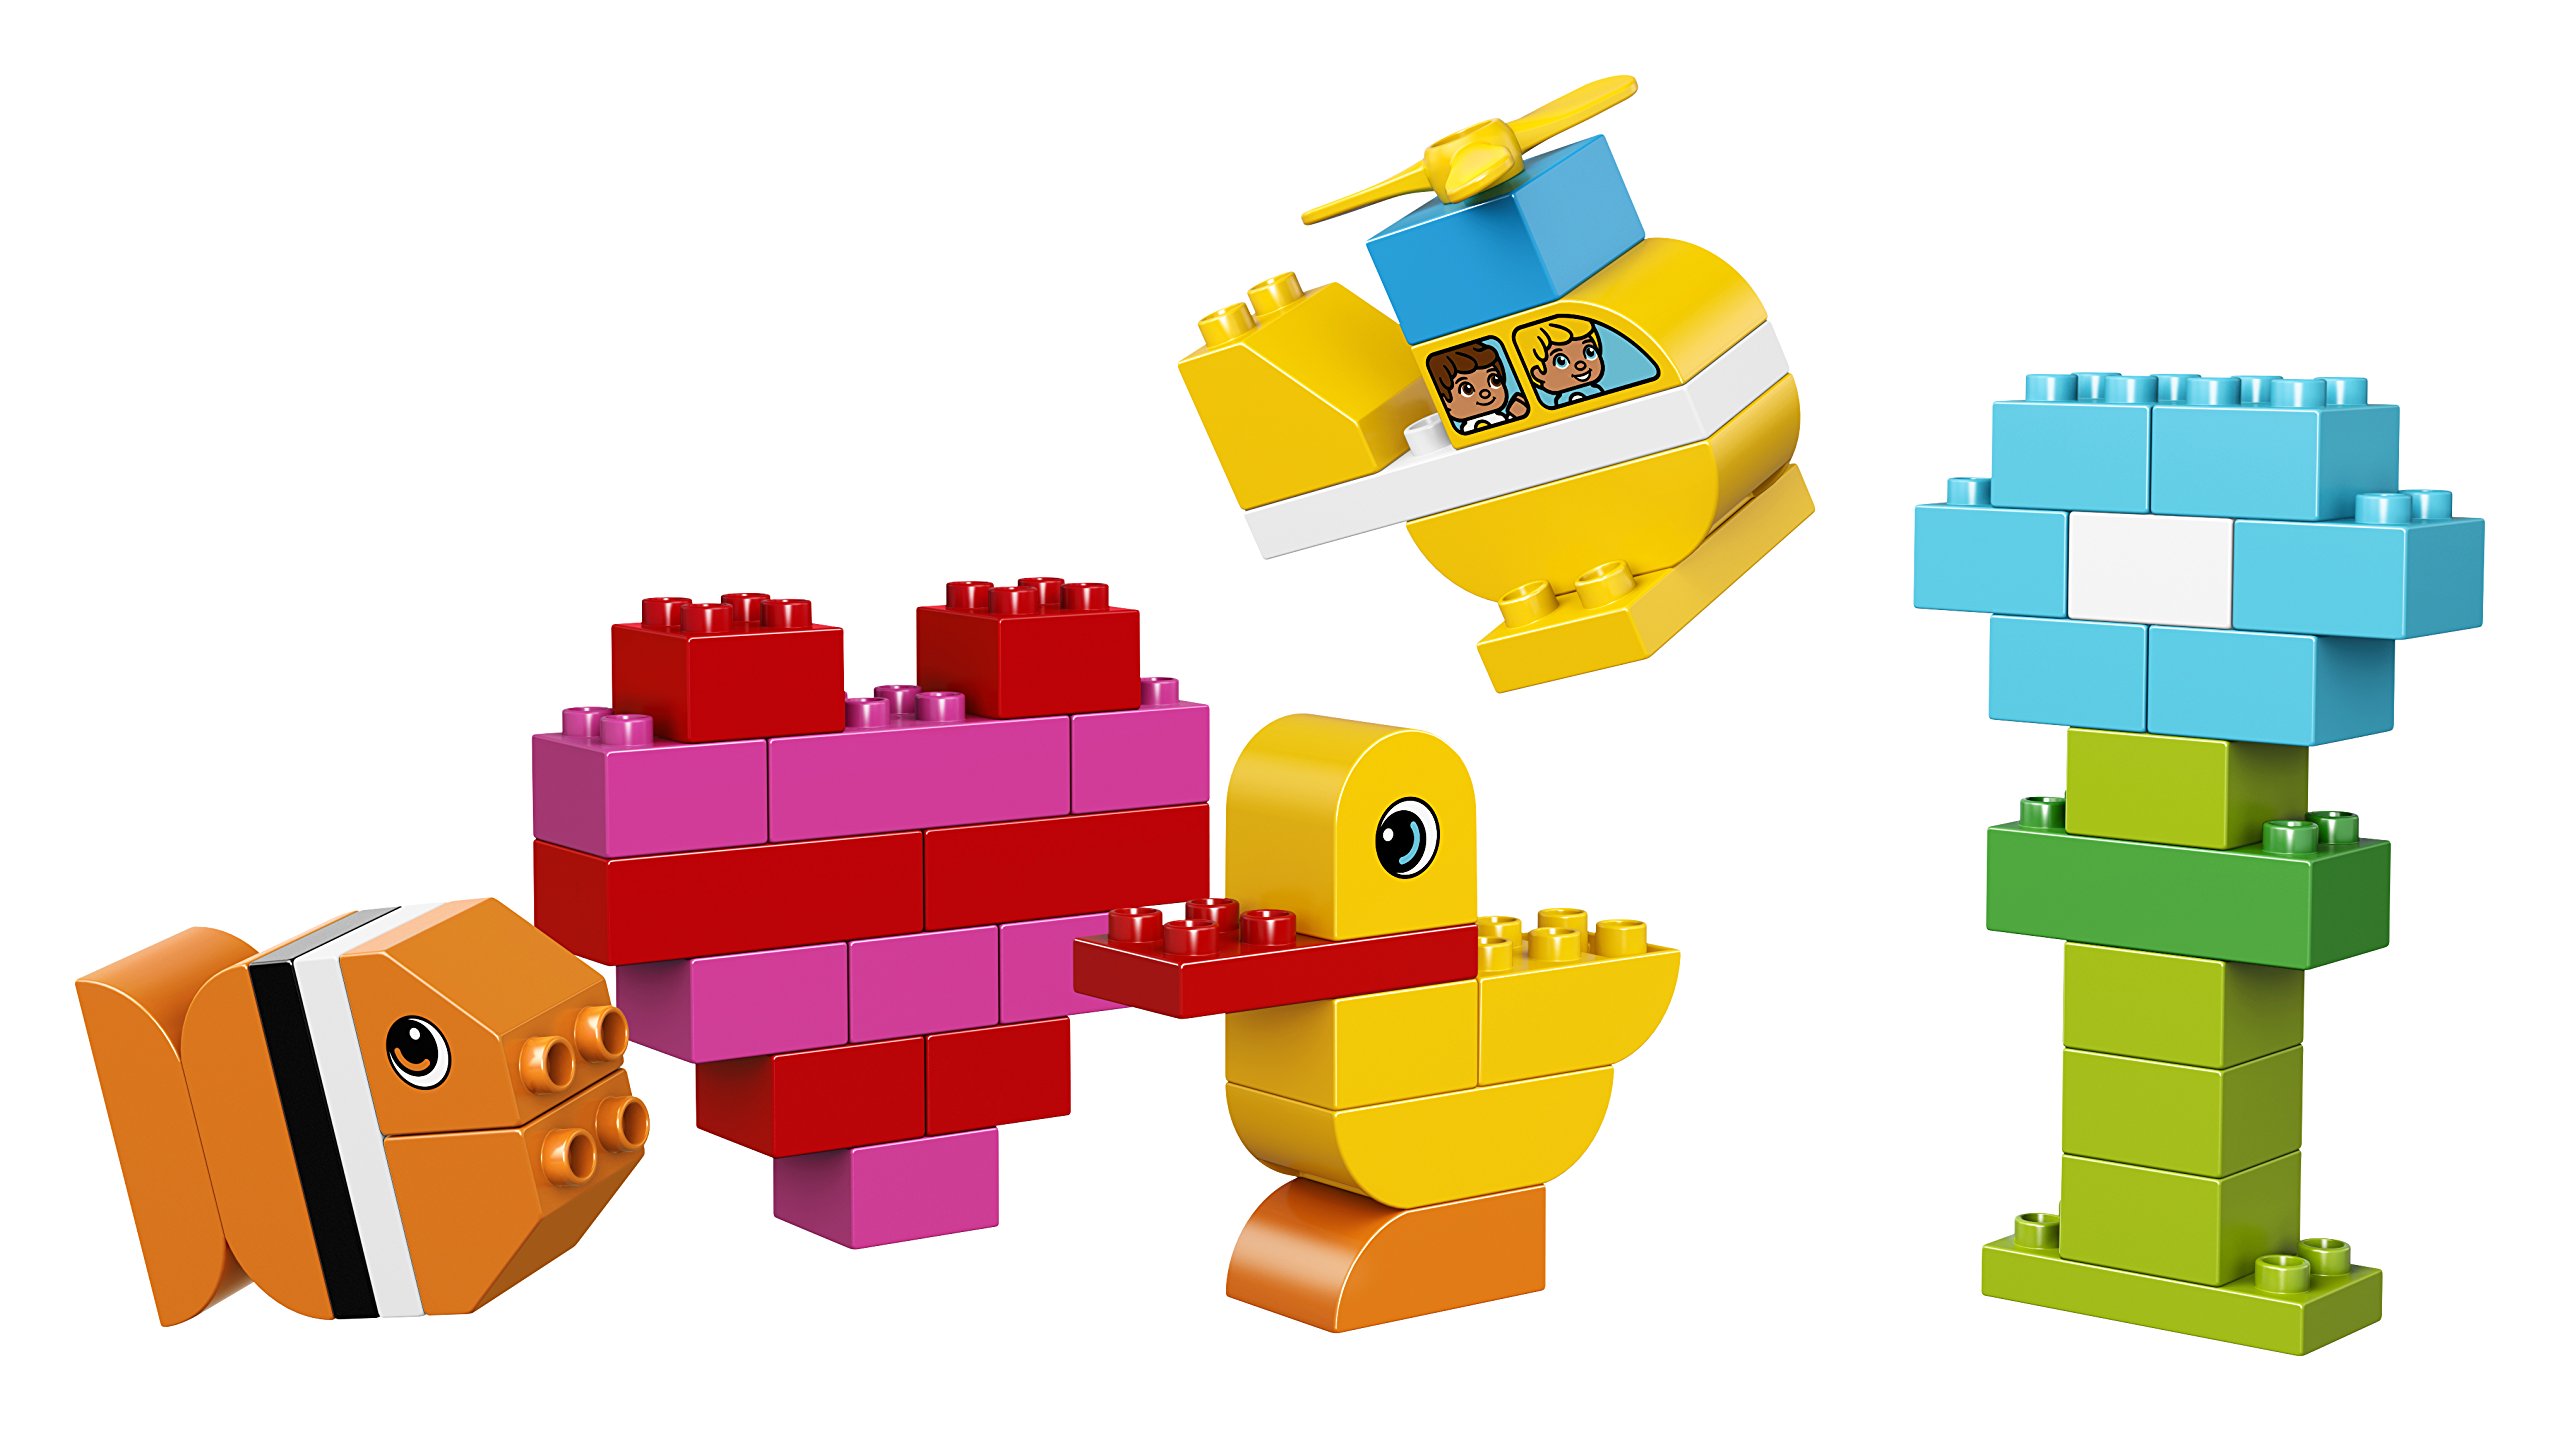 LEGO DUPLO My First Bricks 10848 Colorful Toys Building Kit for Toddler Play and Pretend Play (80 Pieces)